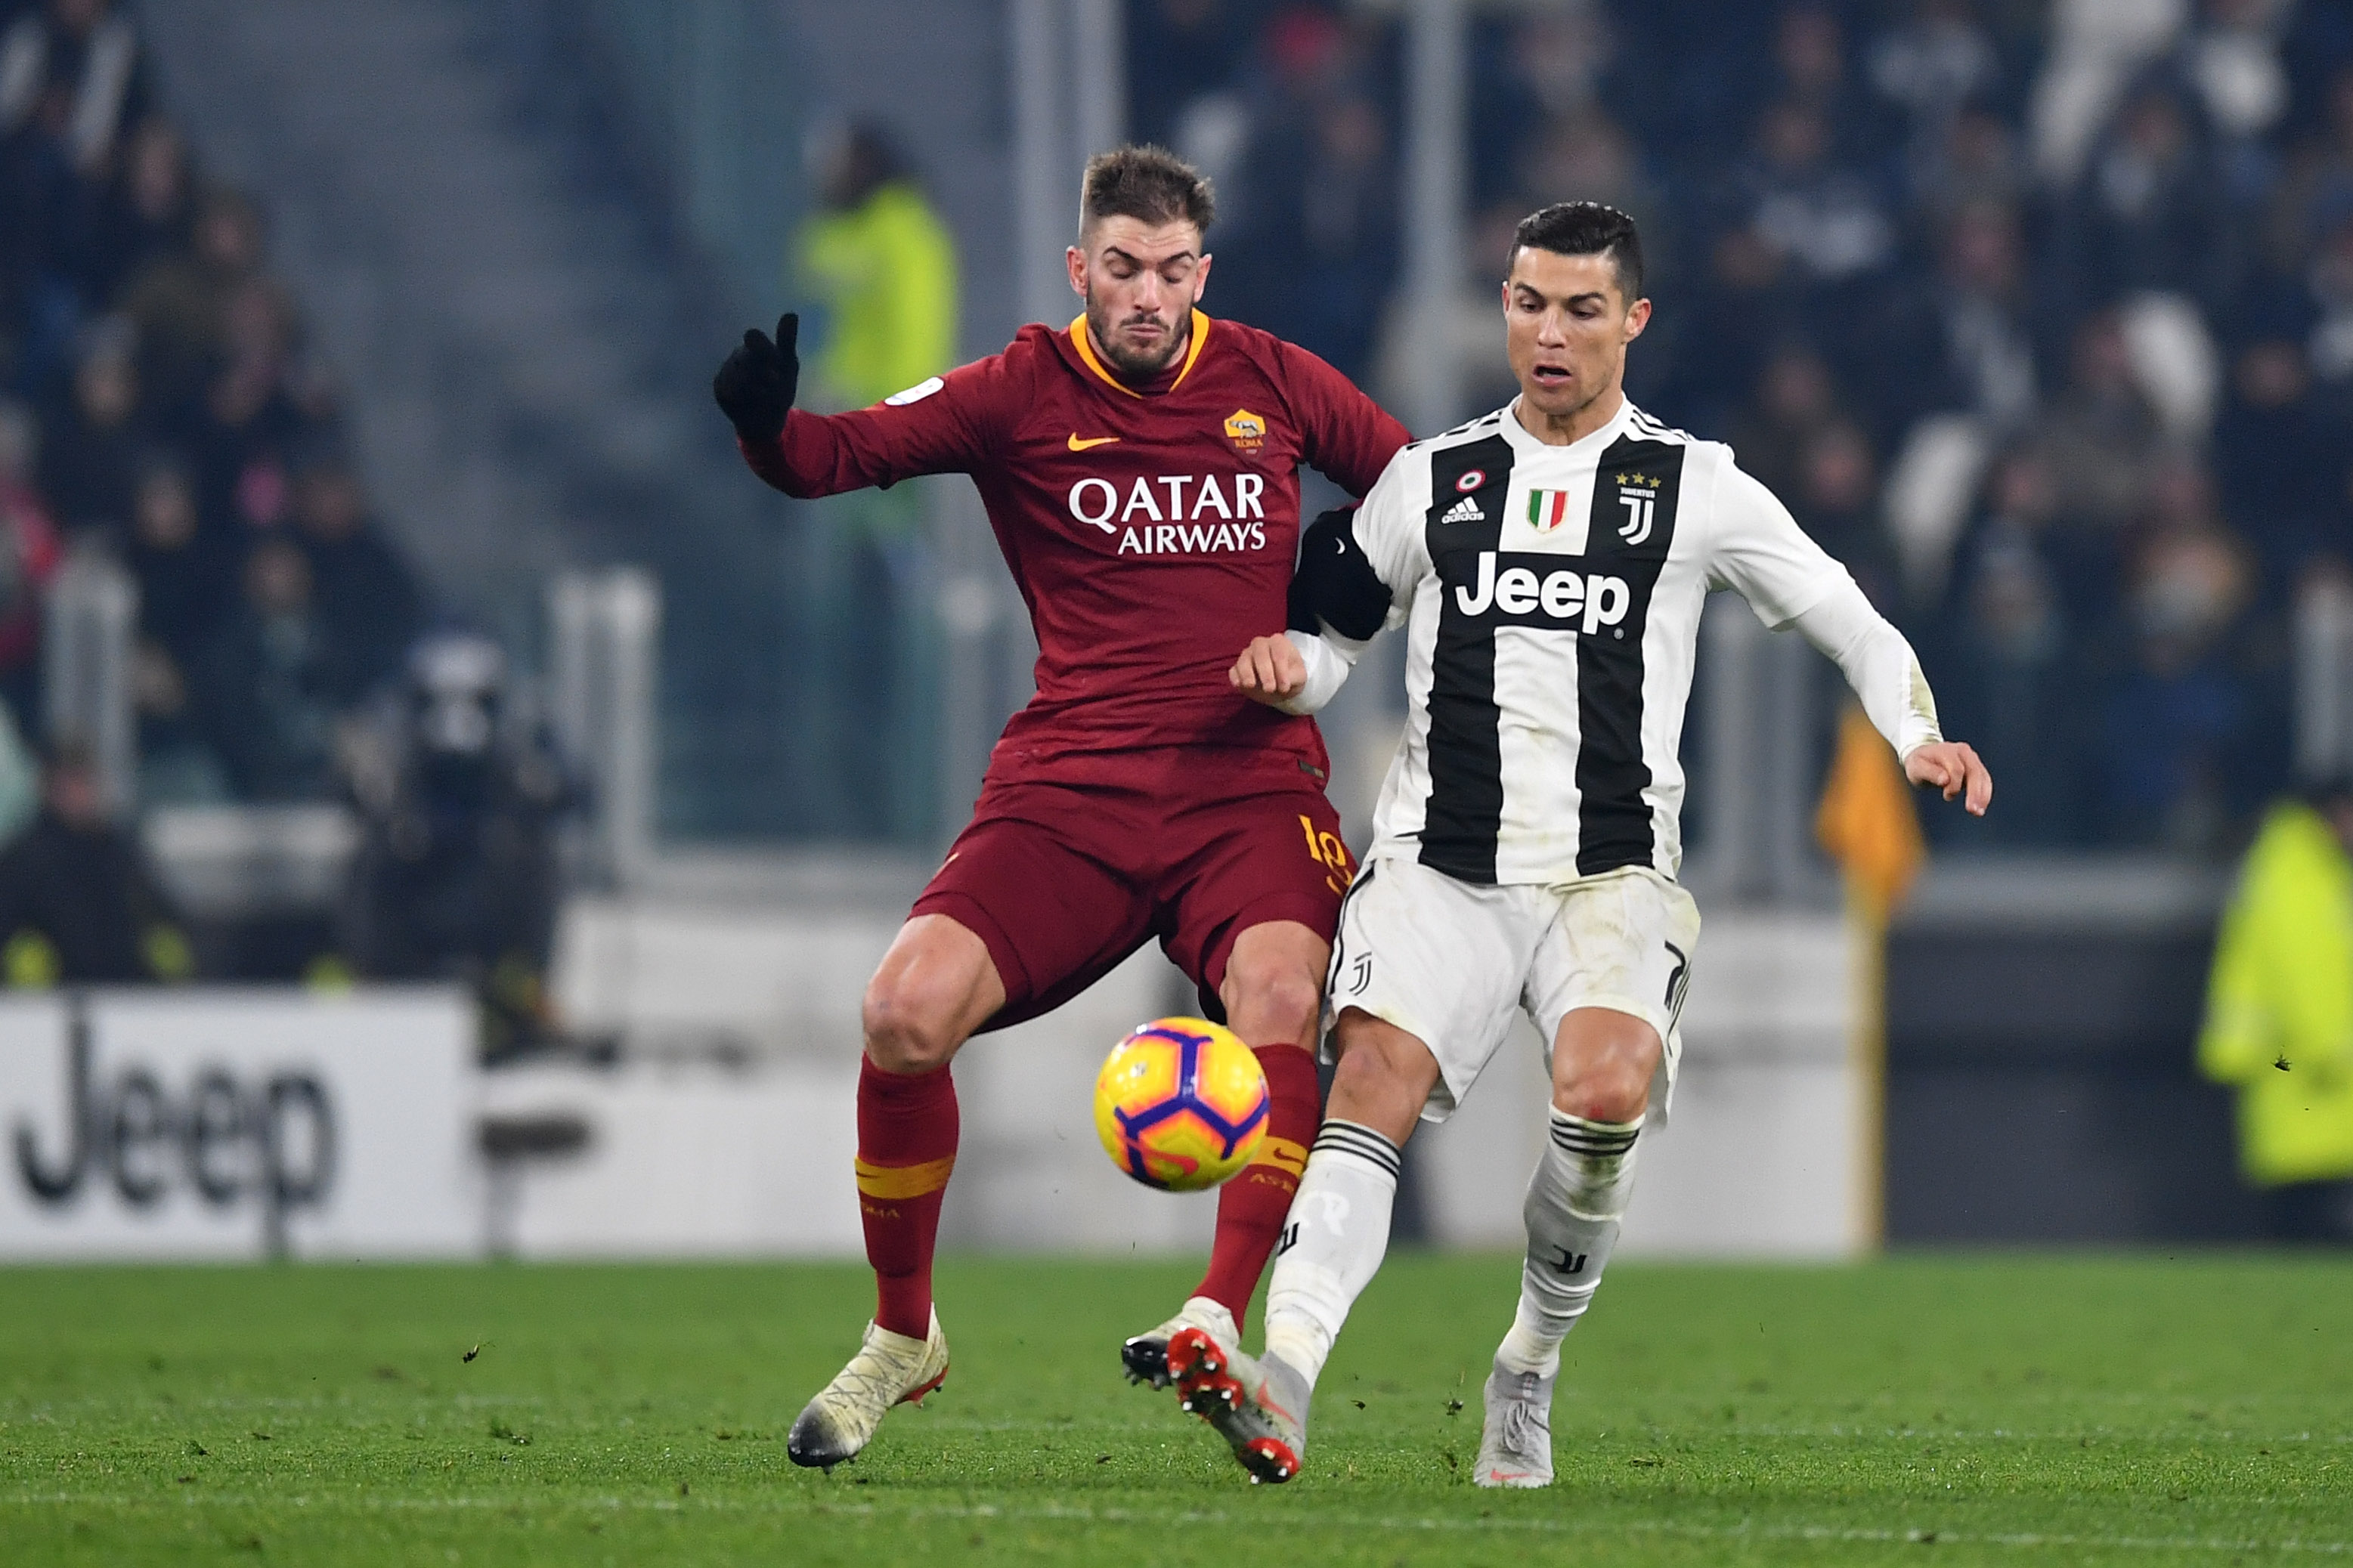 TURIN, ITALY - DECEMBER 22: Cristiano Ronaldo of Juventus competes for the ball with Davide Santon of AS Roma during the Serie A match between Juventus and AS Roma on December 22, 2018 in Turin, Italy.  (Photo by Valerio Pennicino - Juventus FC/Juventus FC via Getty Images)